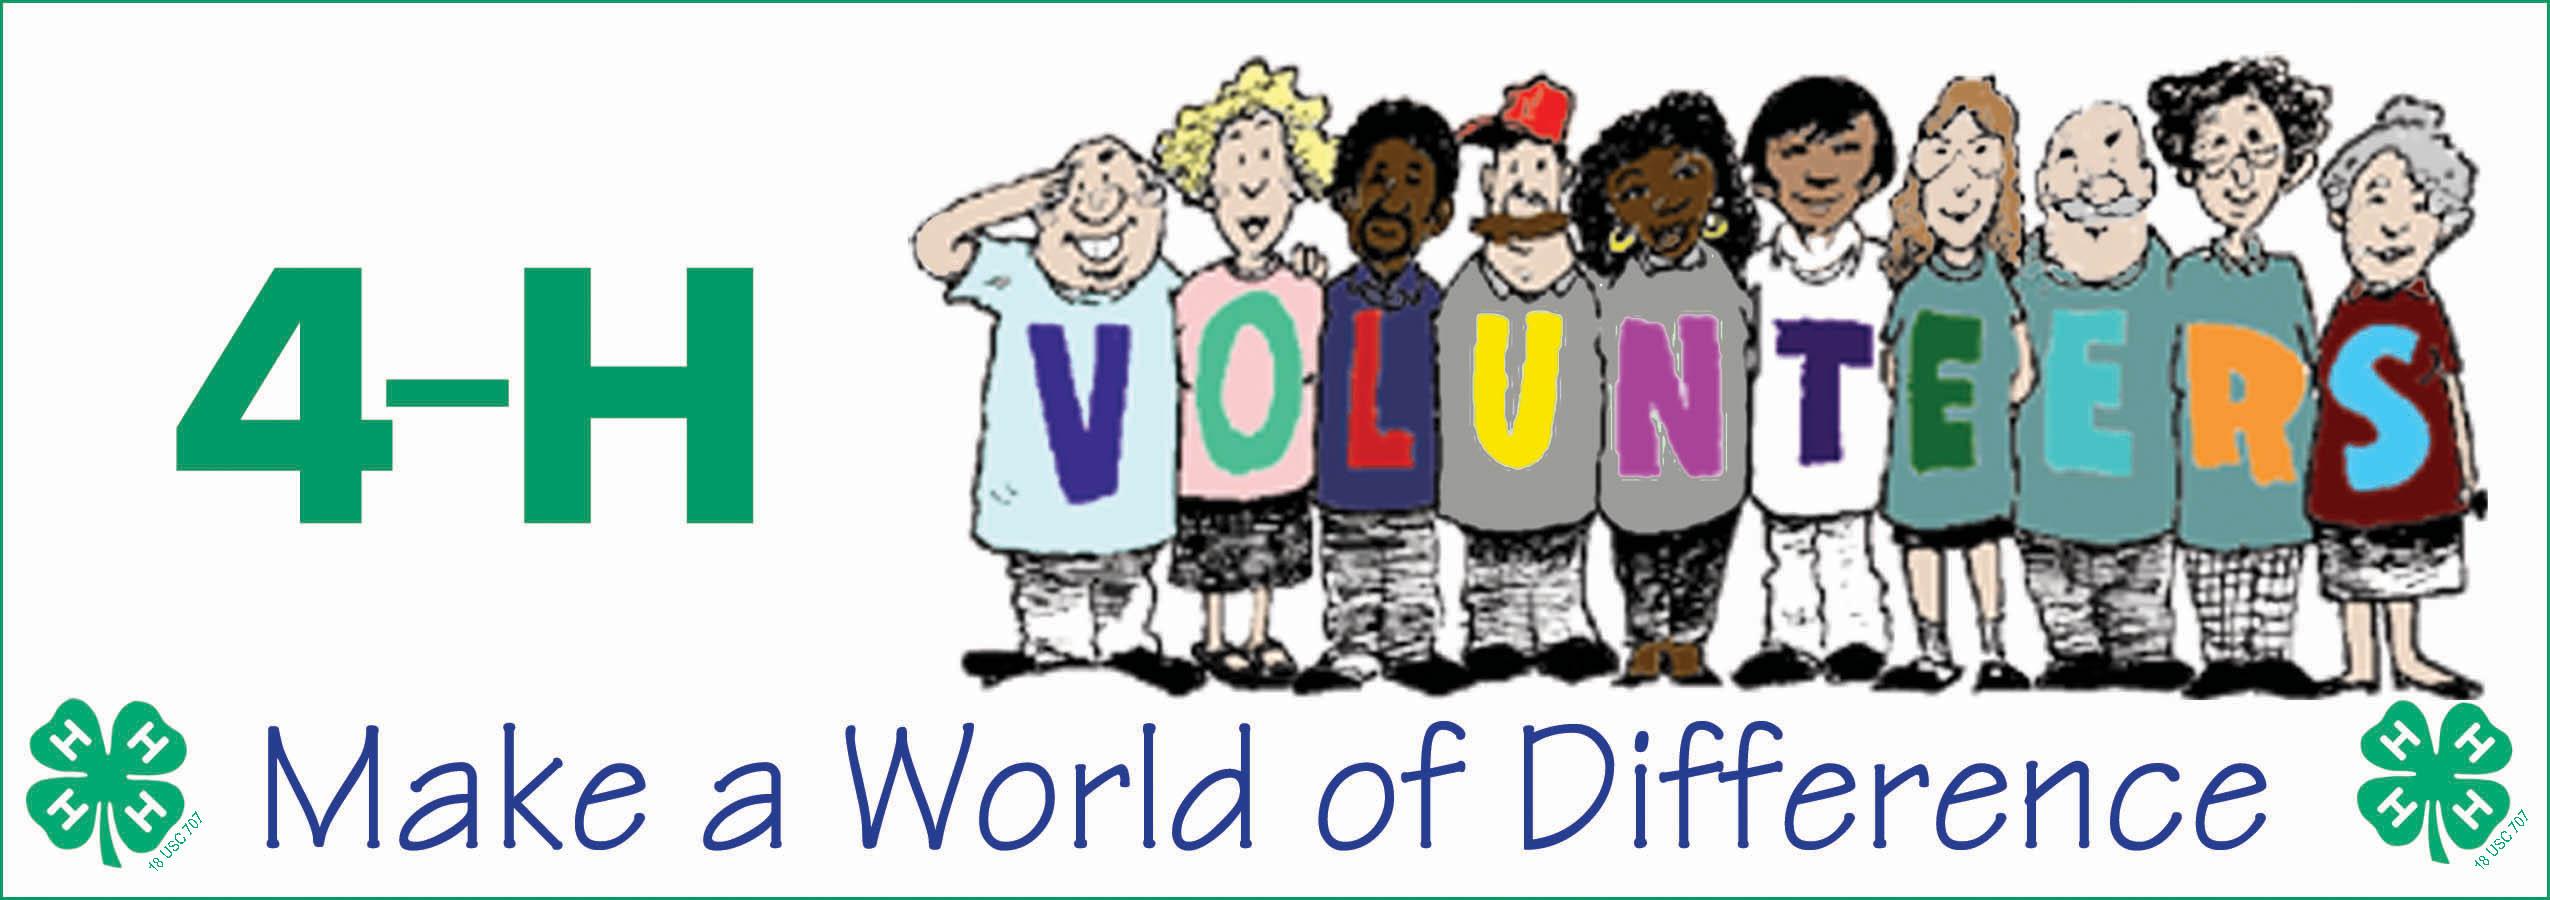 clipart images of volunteers - photo #7